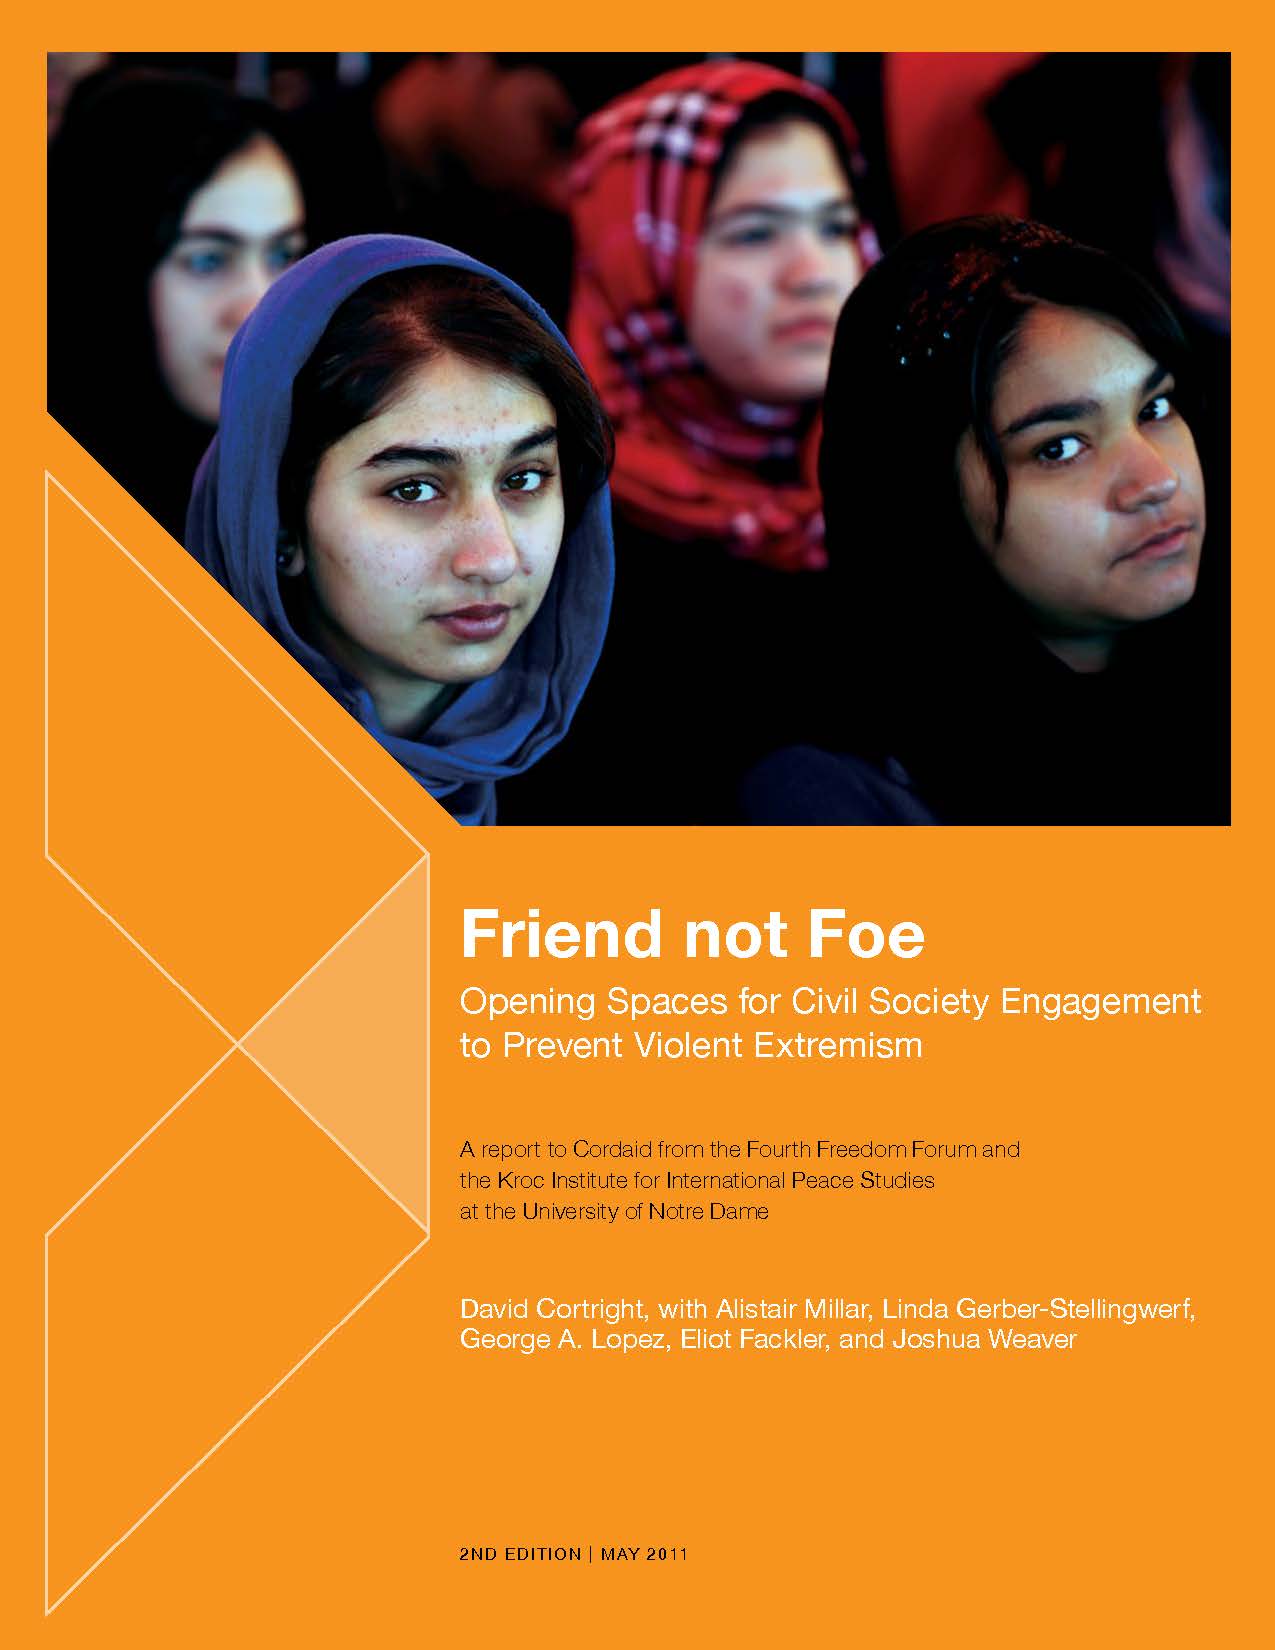 Friend not Foe: Opening Spaces for Civil Society Engagement to Prevent Violent Extremism (2d ed.)